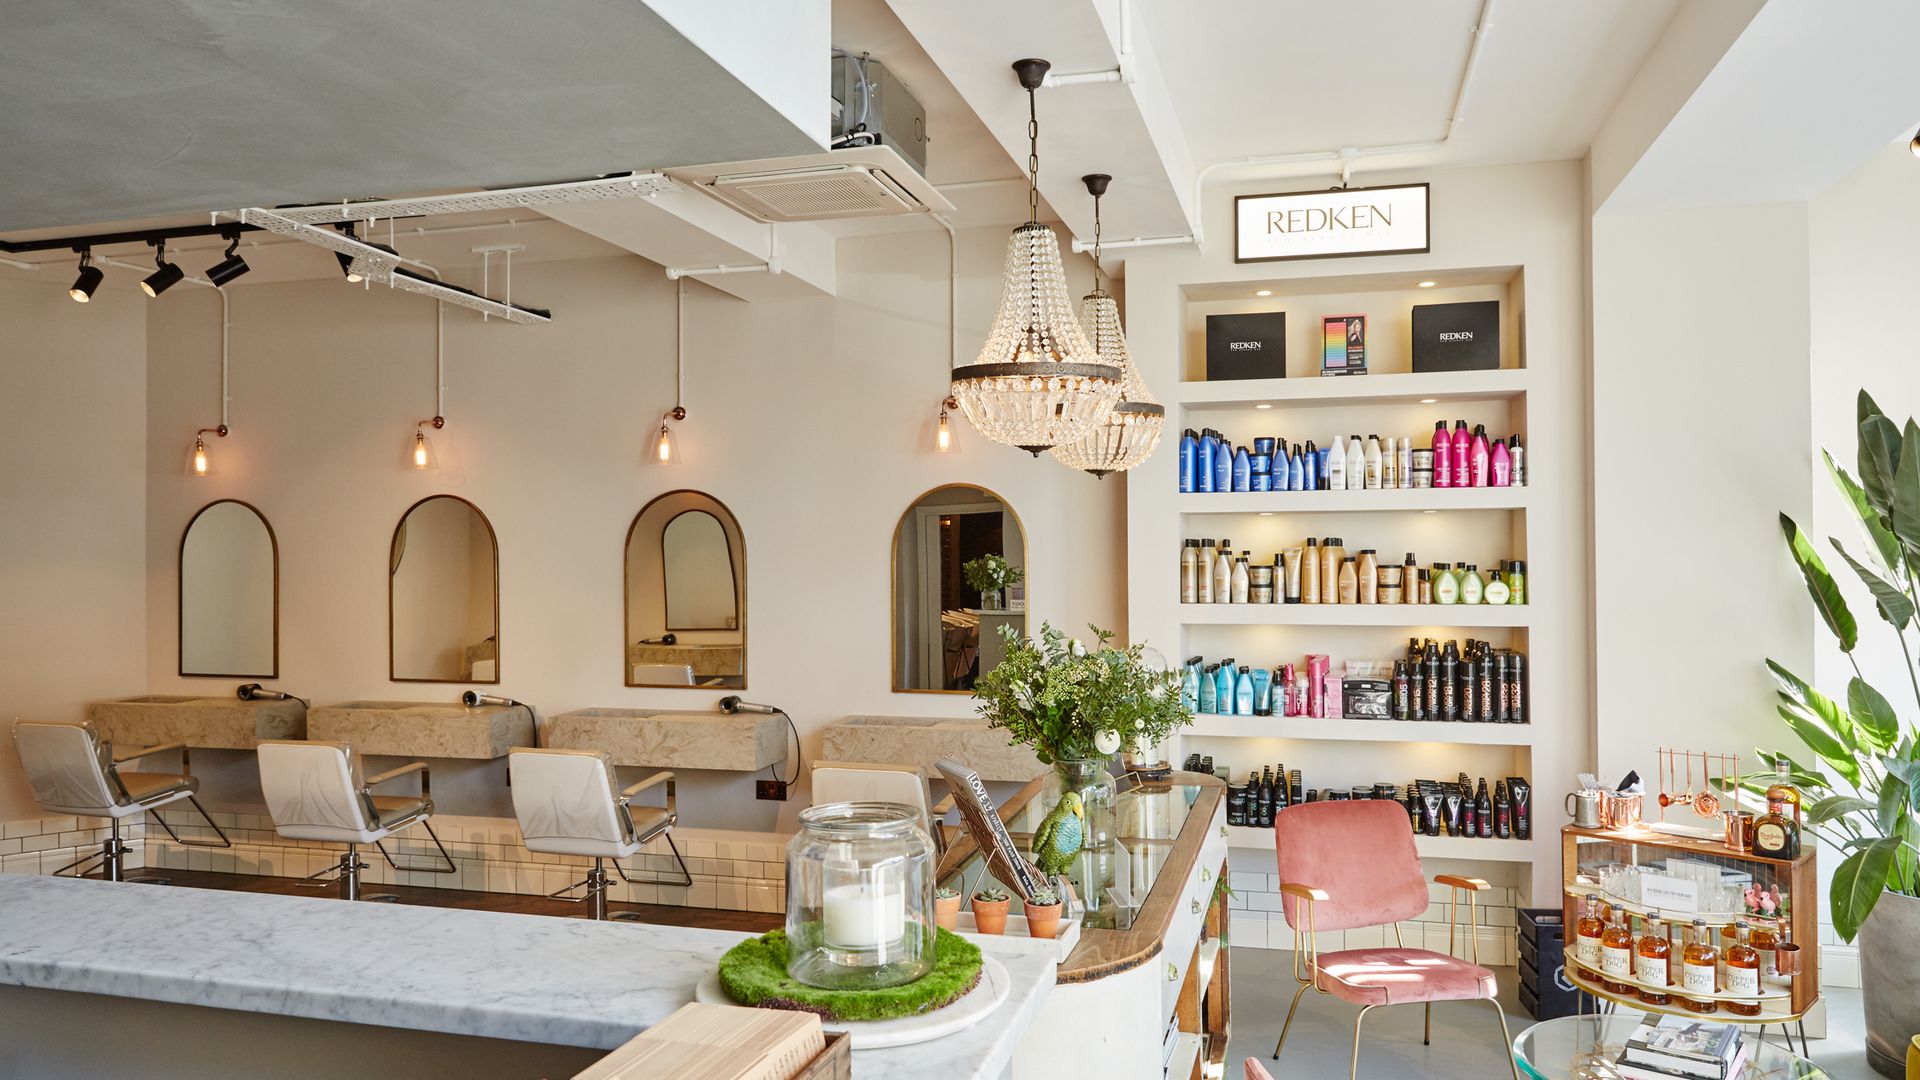 The best blow dry bars in London, tried & tested